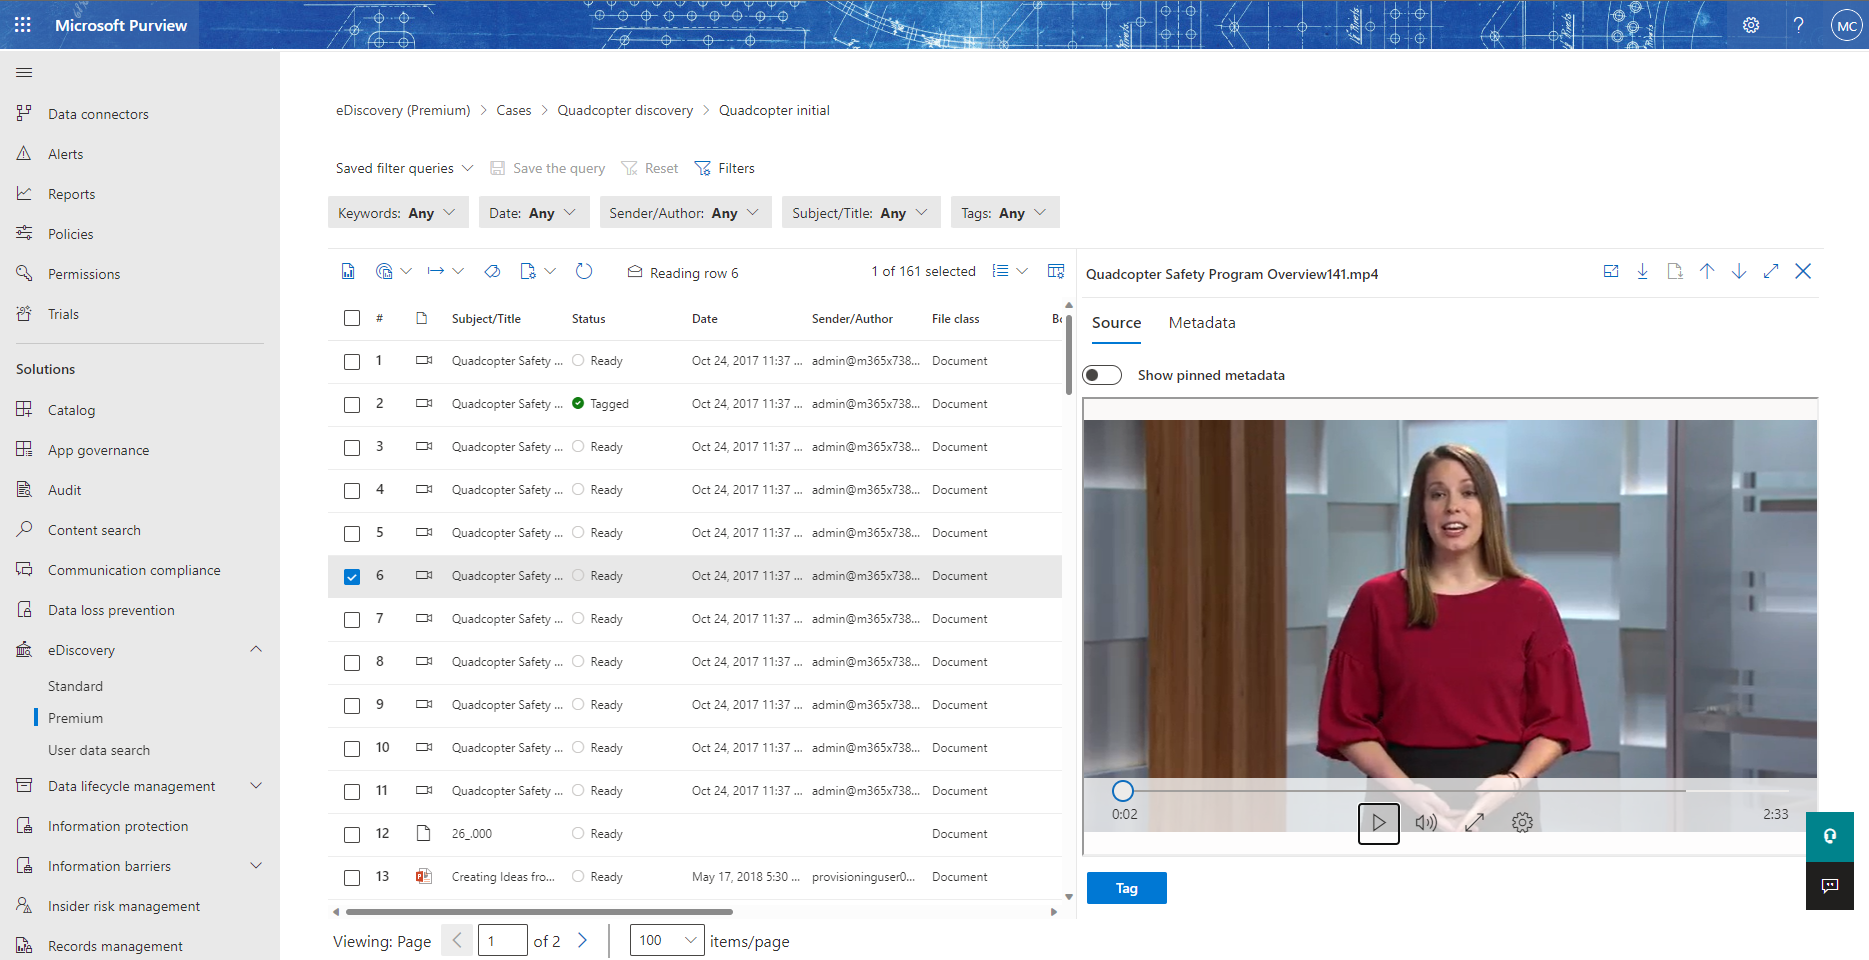 eDiscovery UI screenshot with ability to preview video found